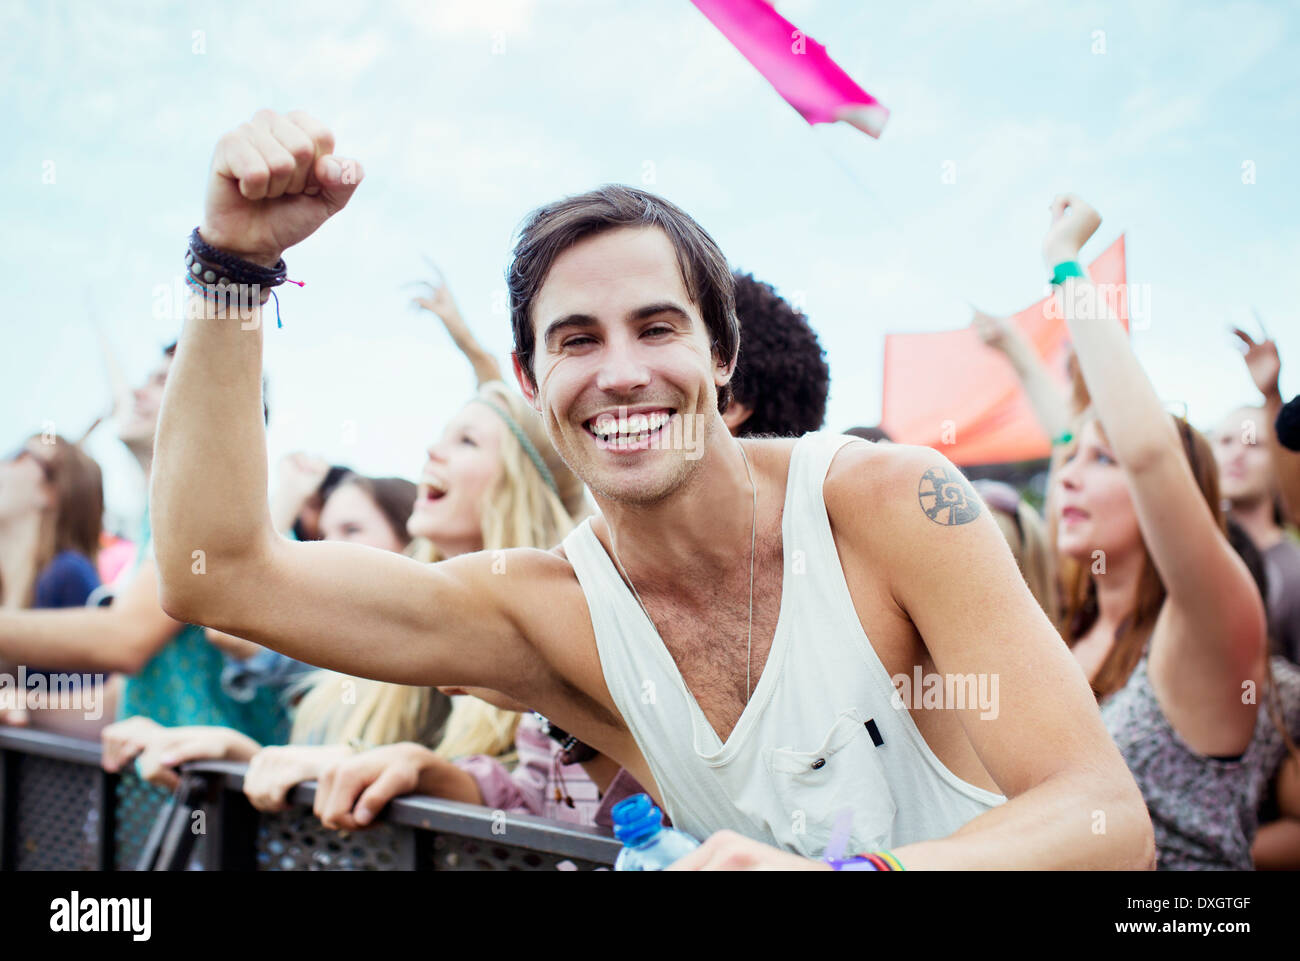 Enthusiastic man cheering at music festival Stock Photo